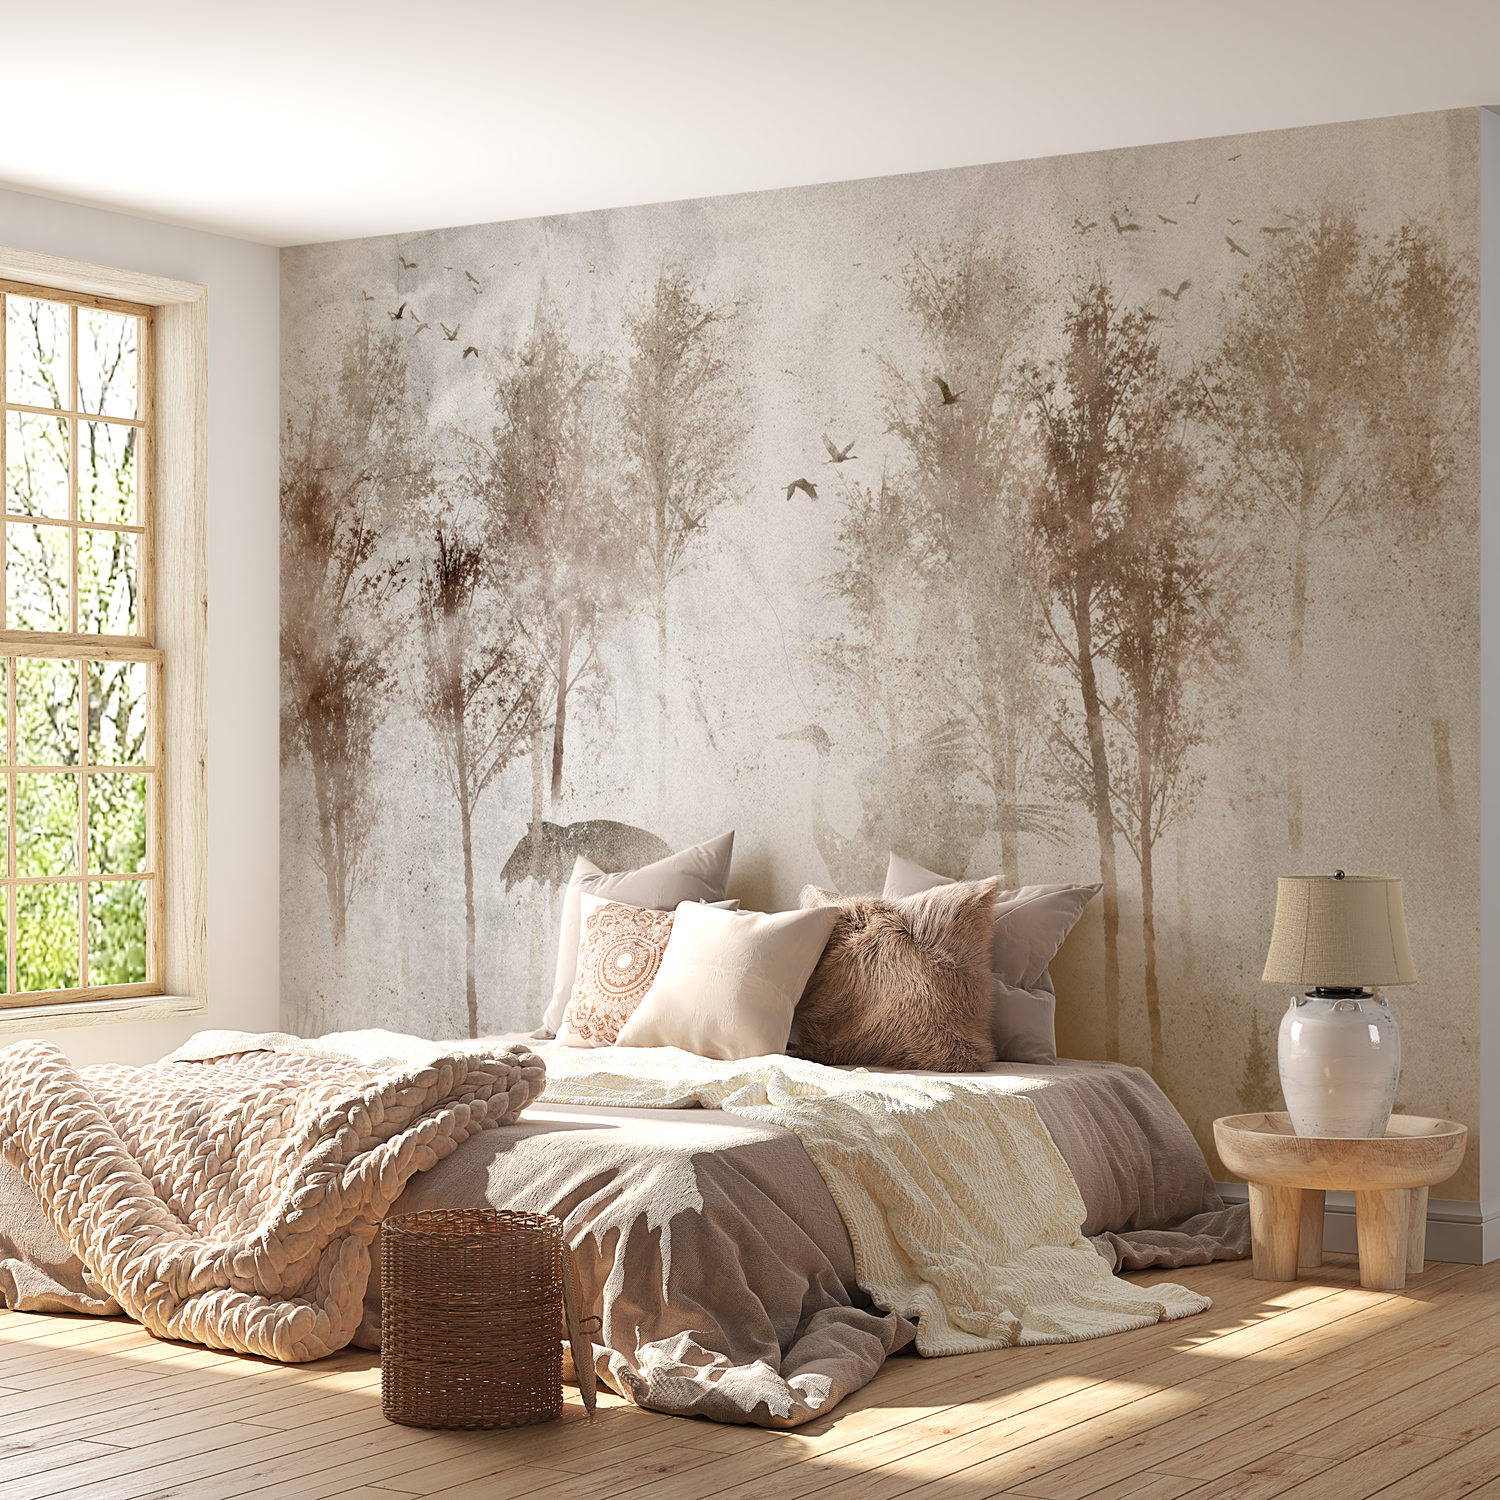 Peel & Stick Landscape Wall Mural - Birds In Foggy Forest - Removable Wallpaper 38"Wx27"H